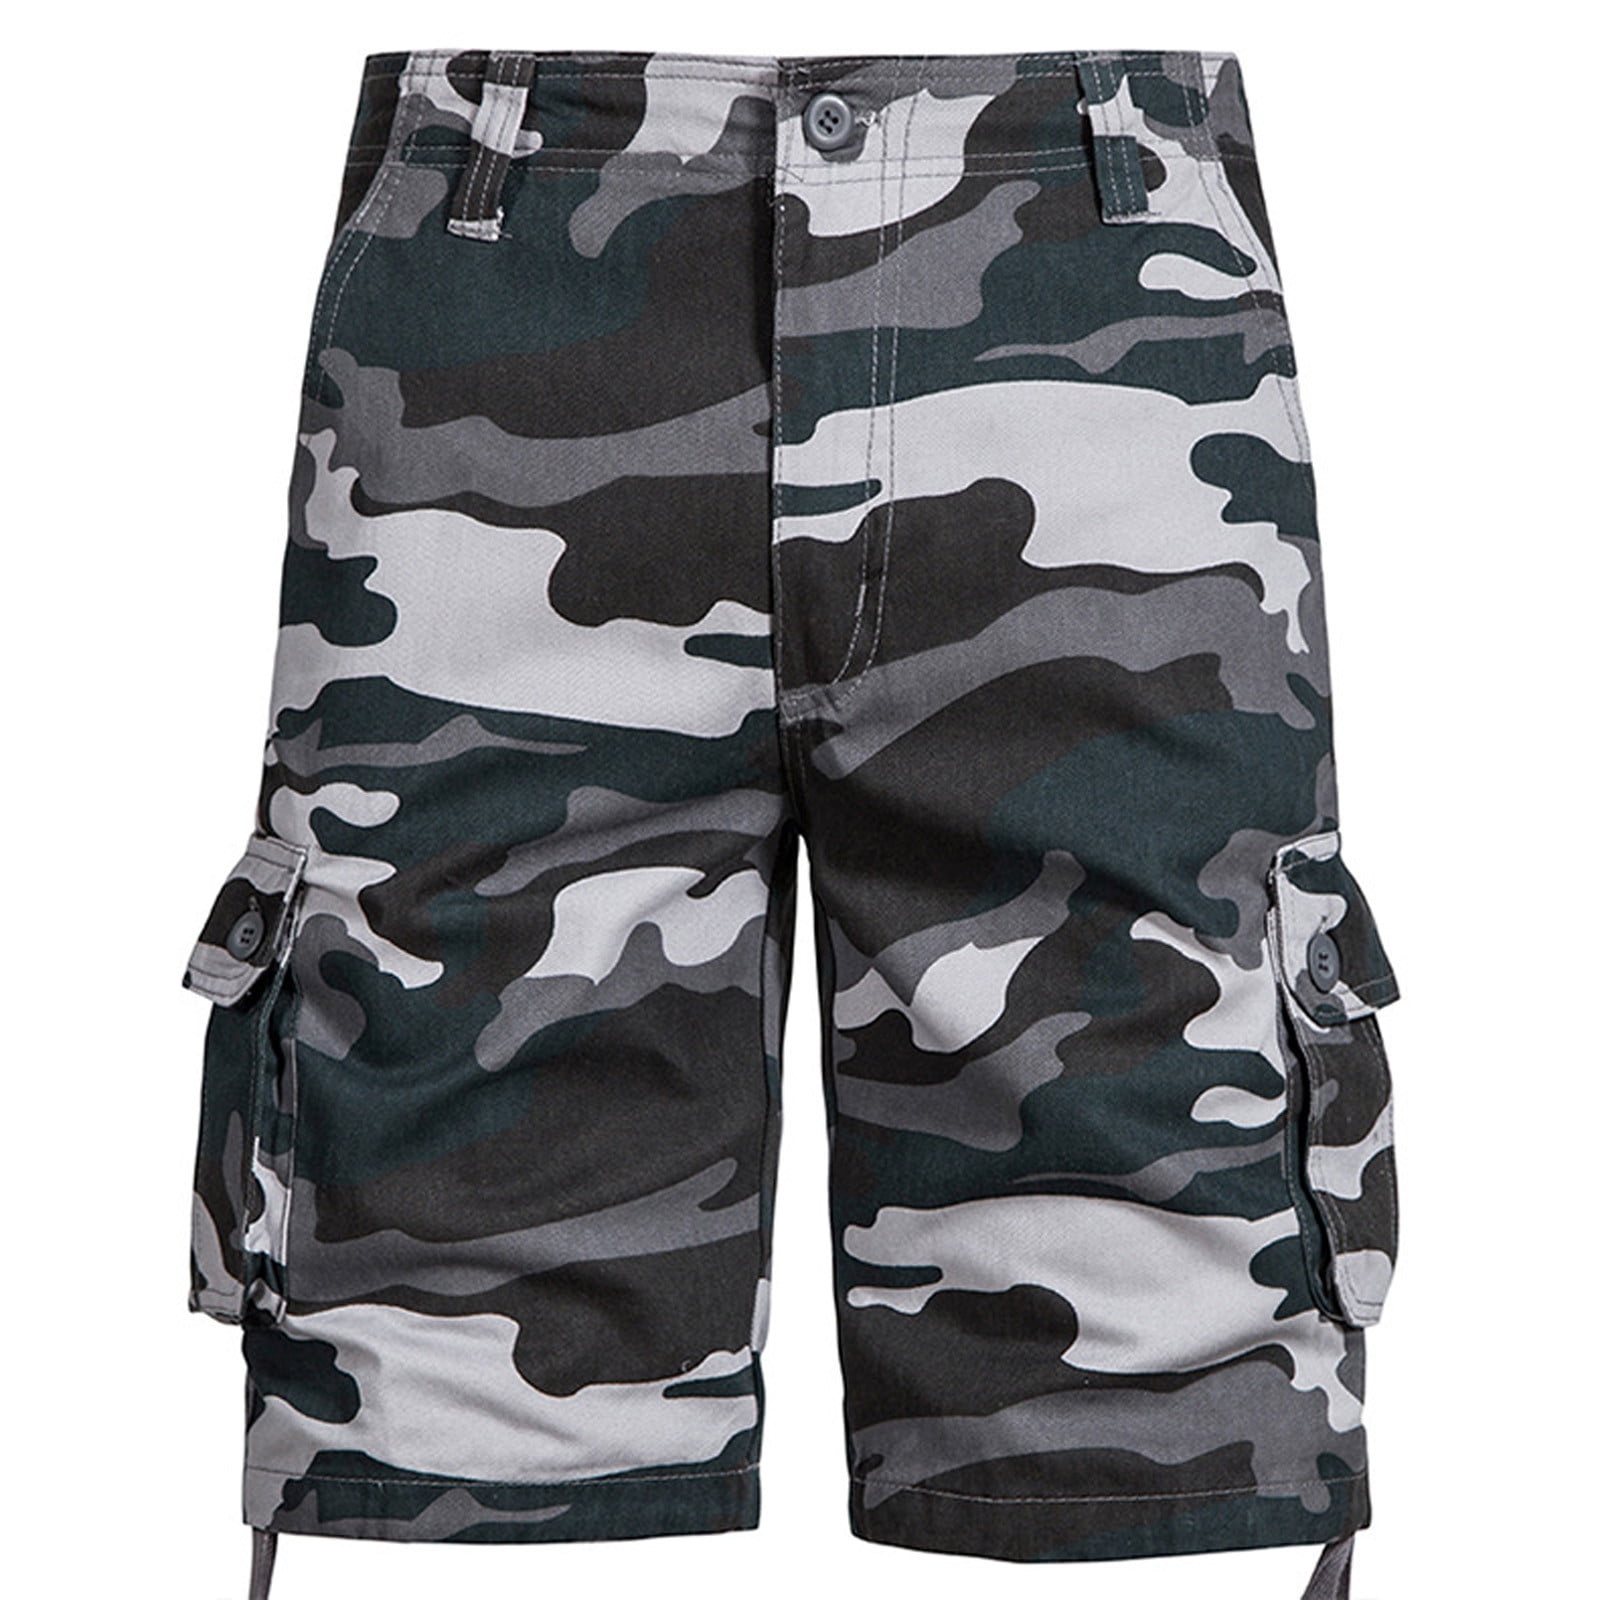 Mens Shorts printing Camouflage Cargo Shorts Low Rise Casual Loose